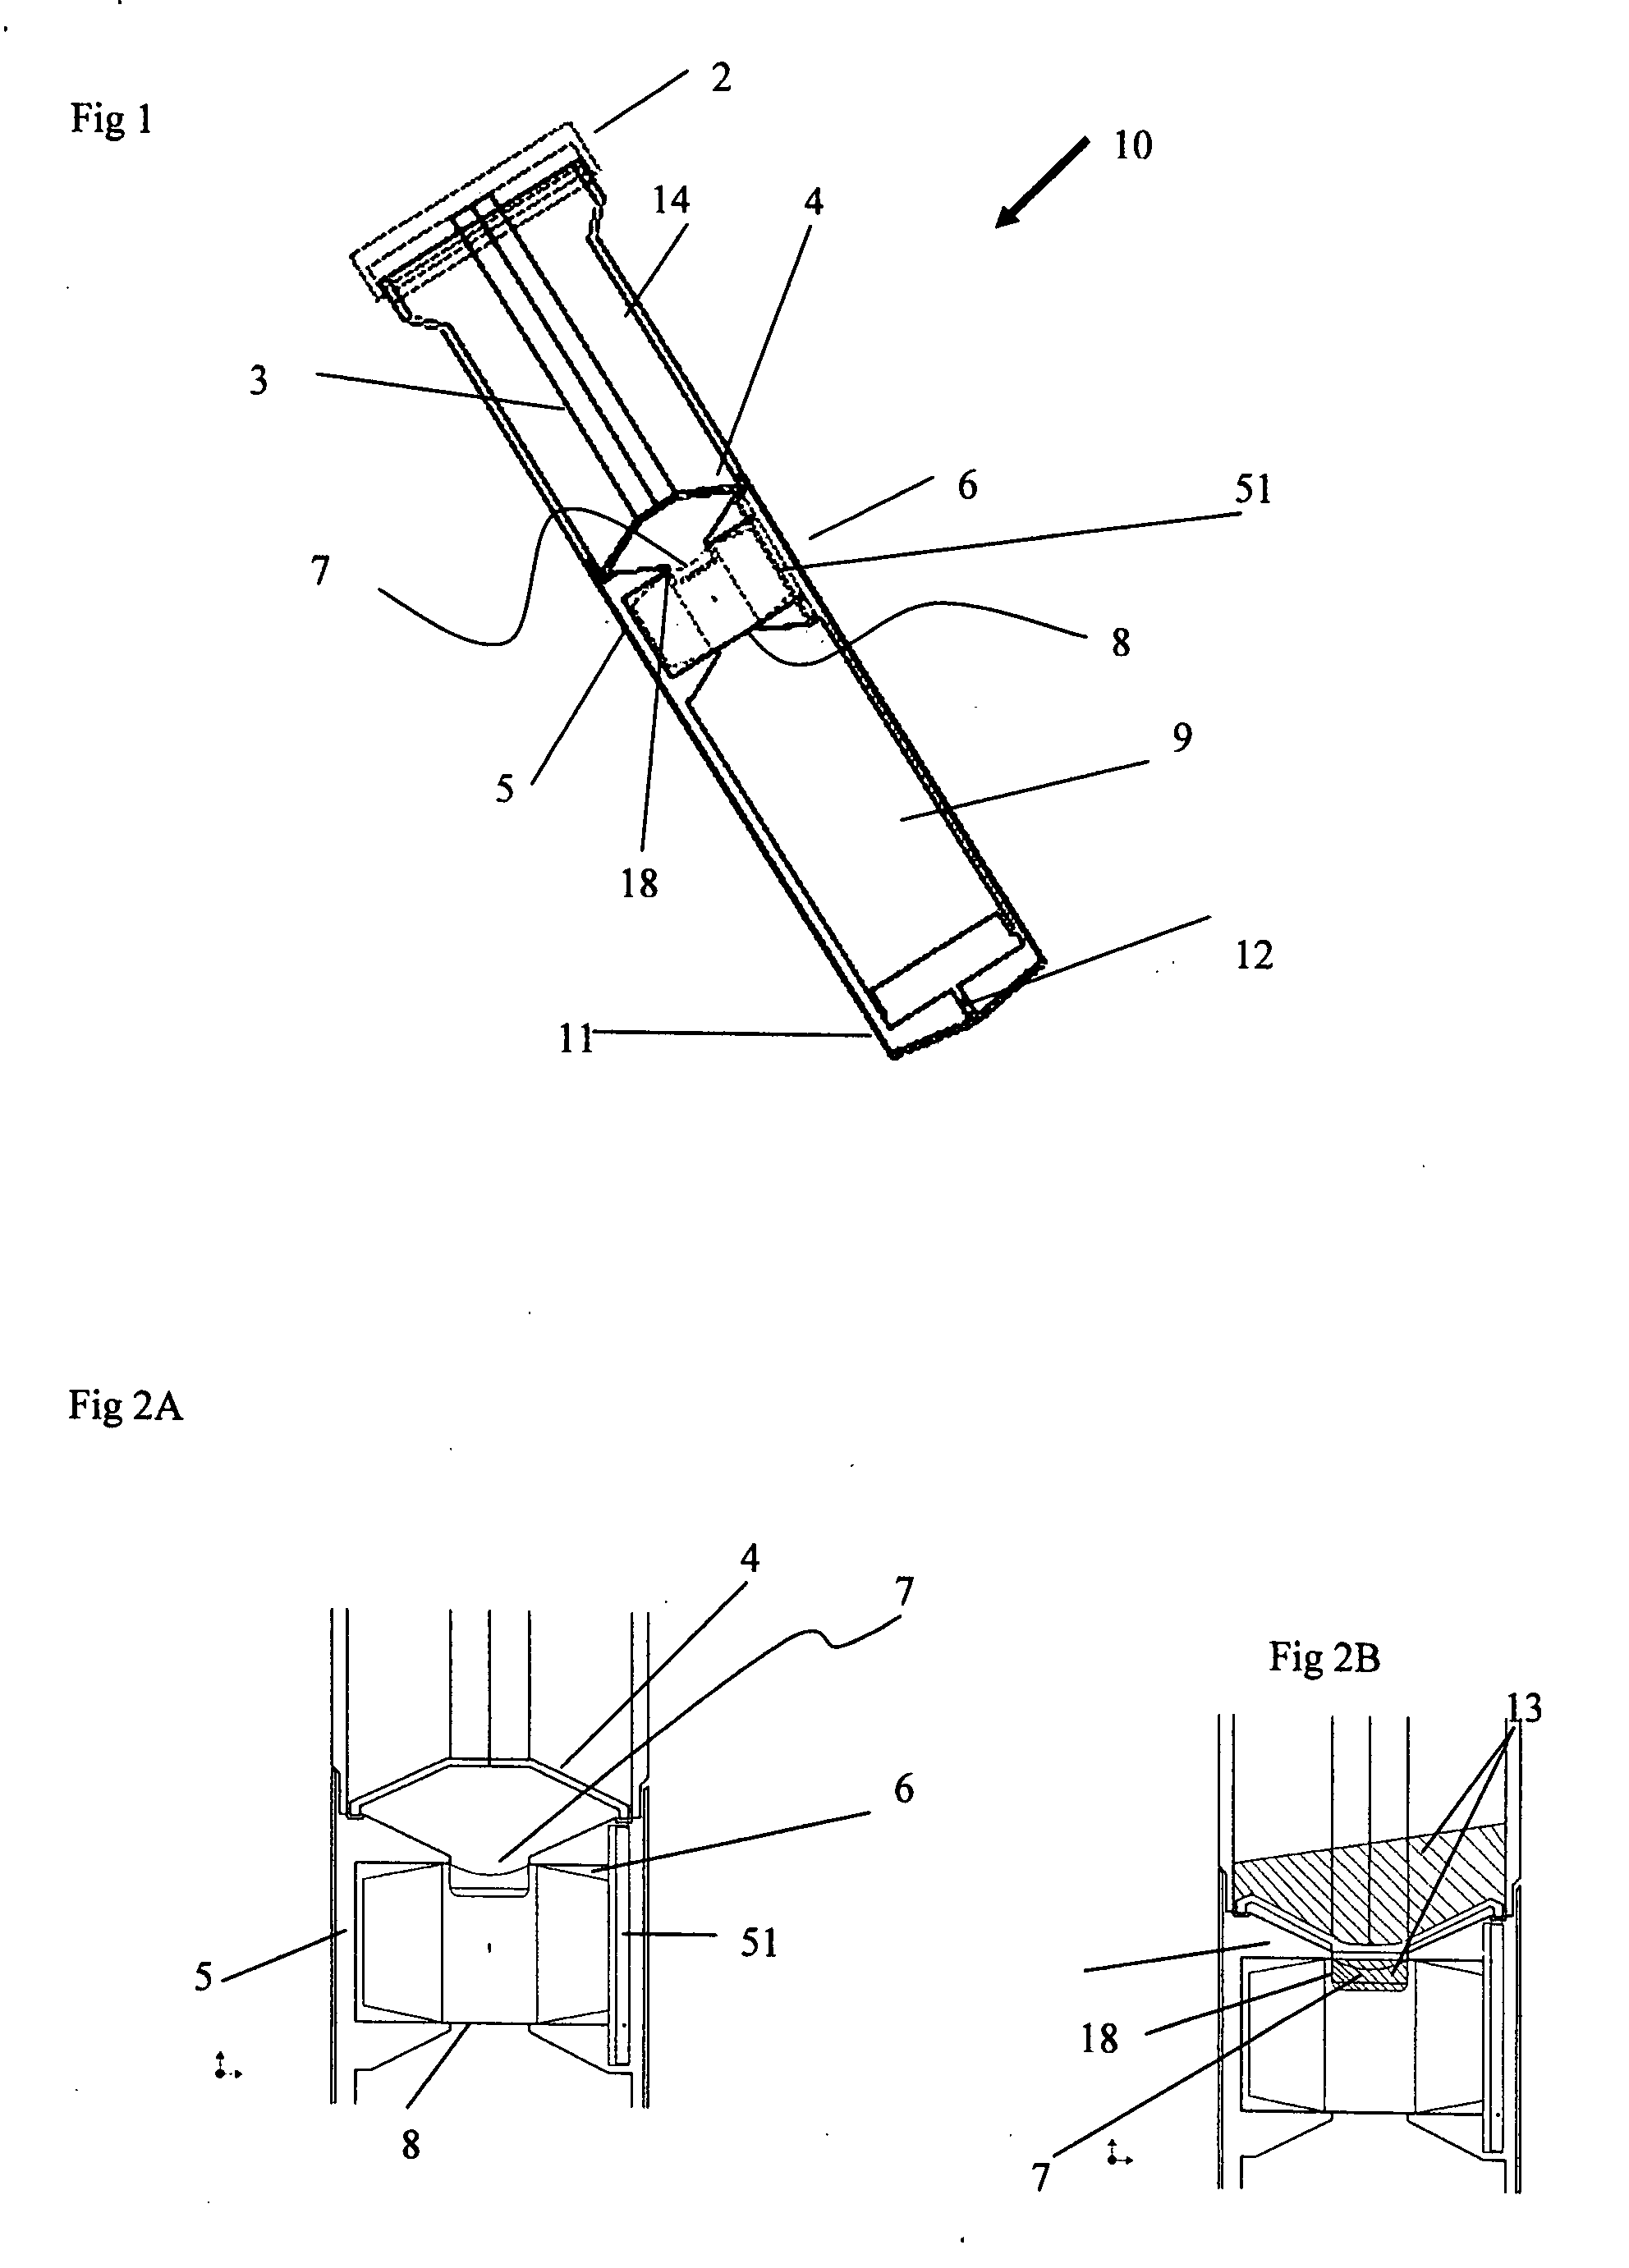 Specimen collection and testing apparatus